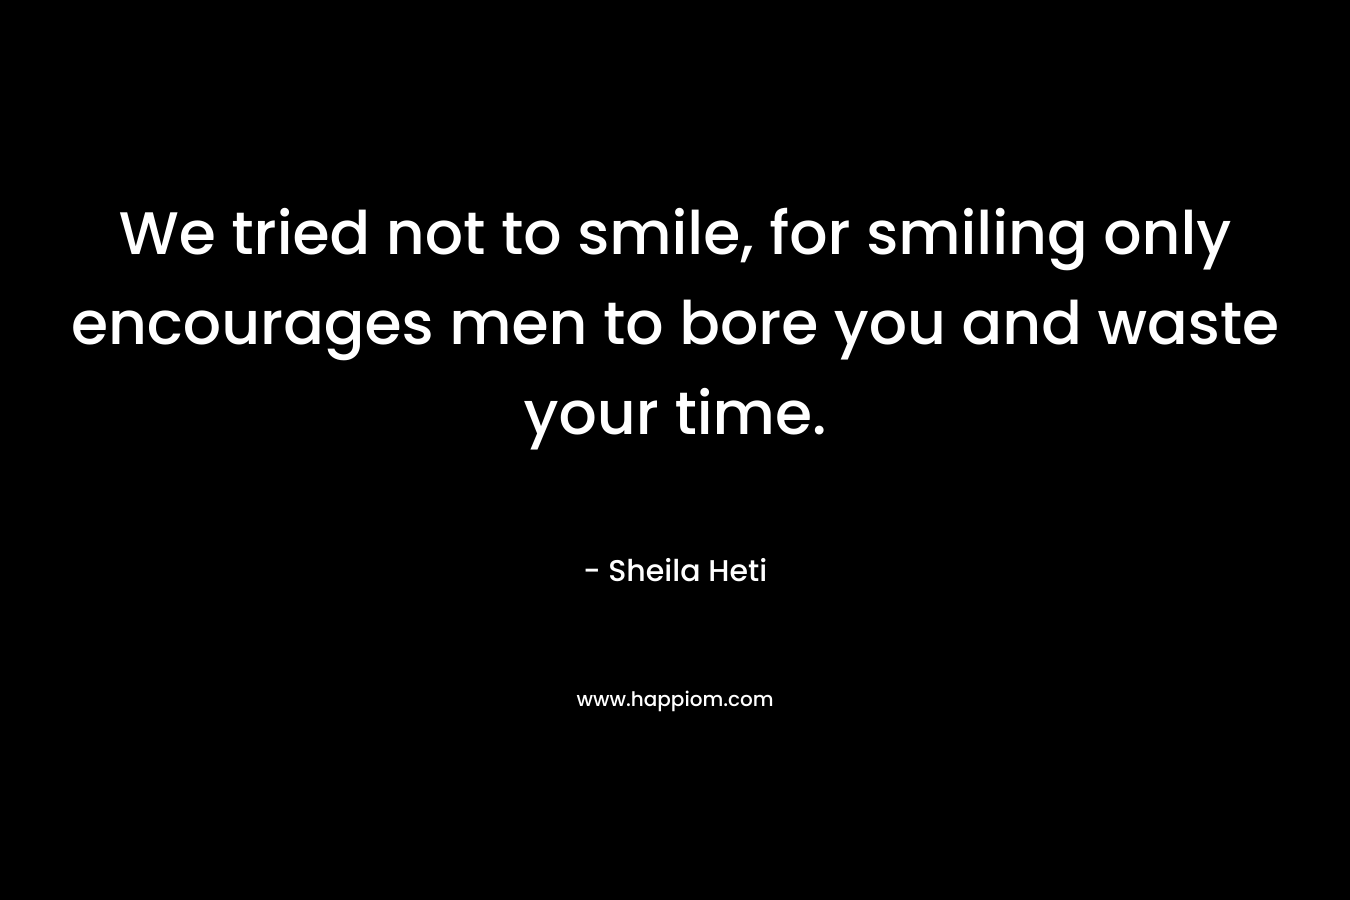 We tried not to smile, for smiling only encourages men to bore you and waste your time. – Sheila Heti